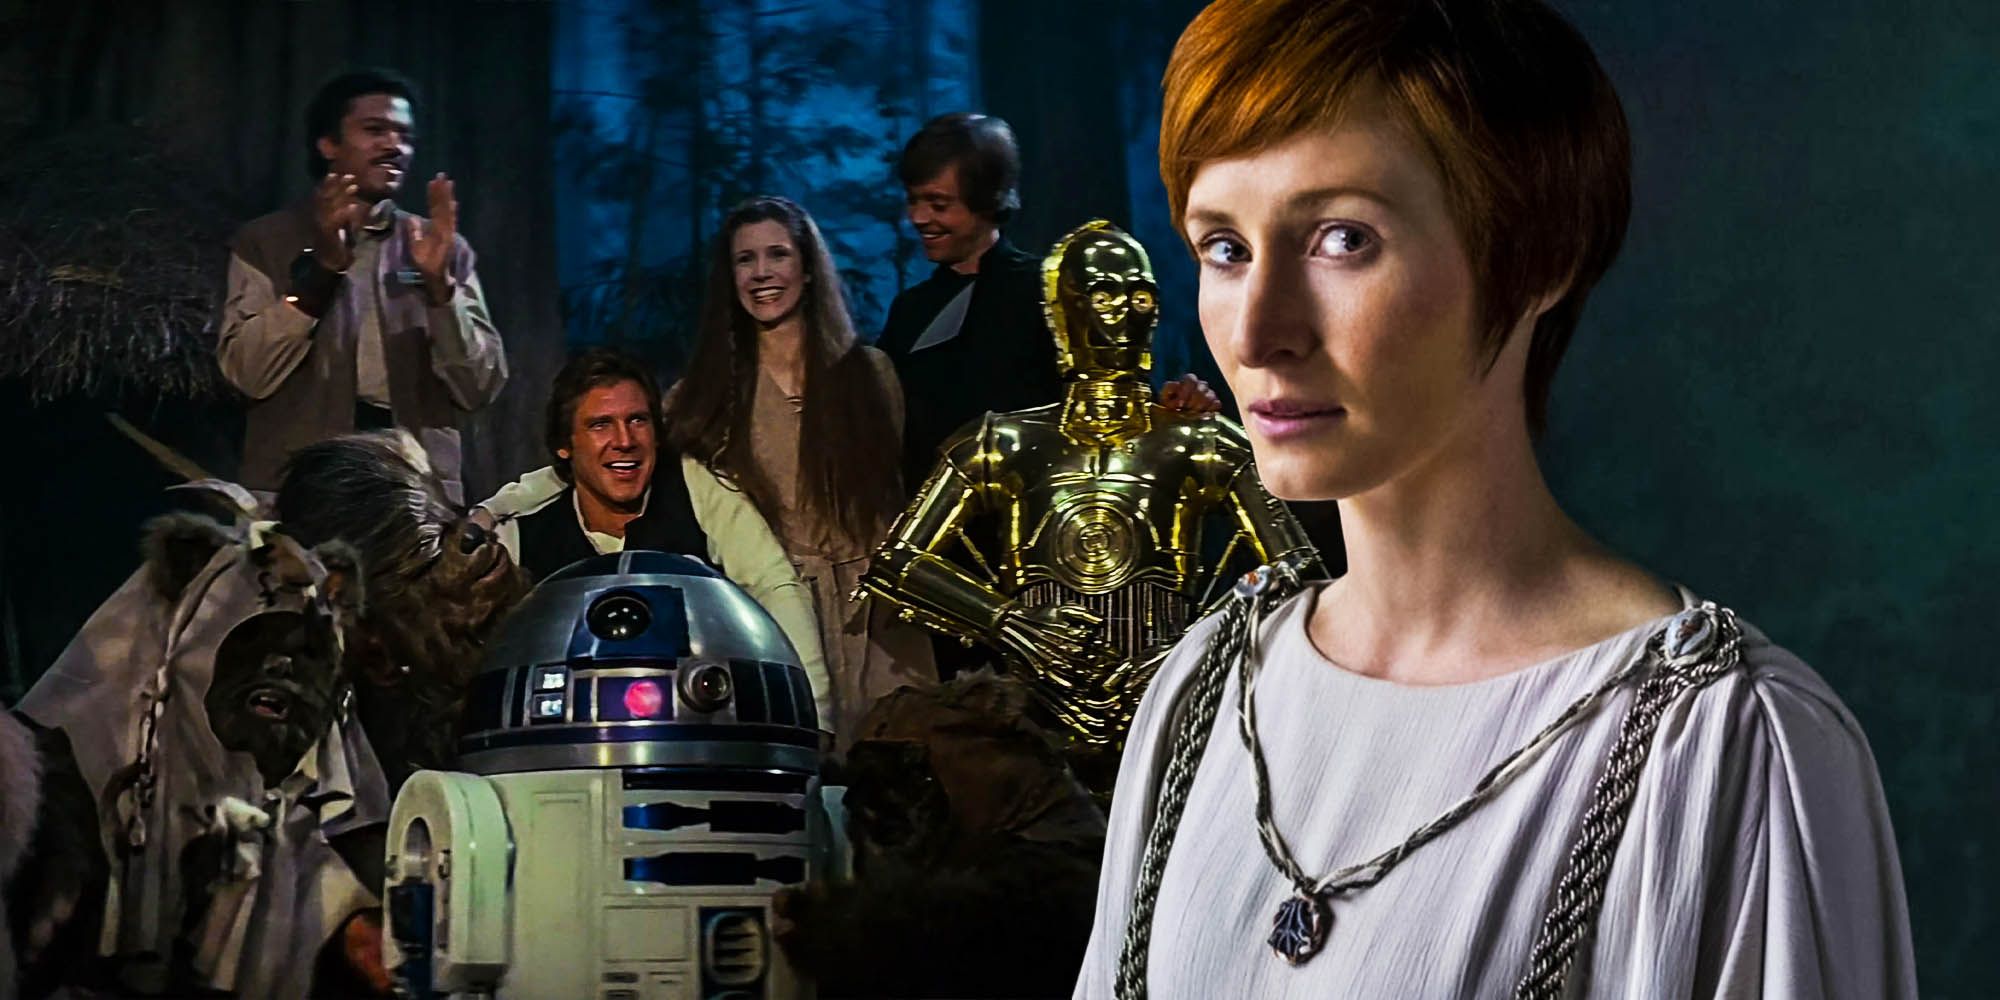 what happened to Mon Mothma after return of the jedi